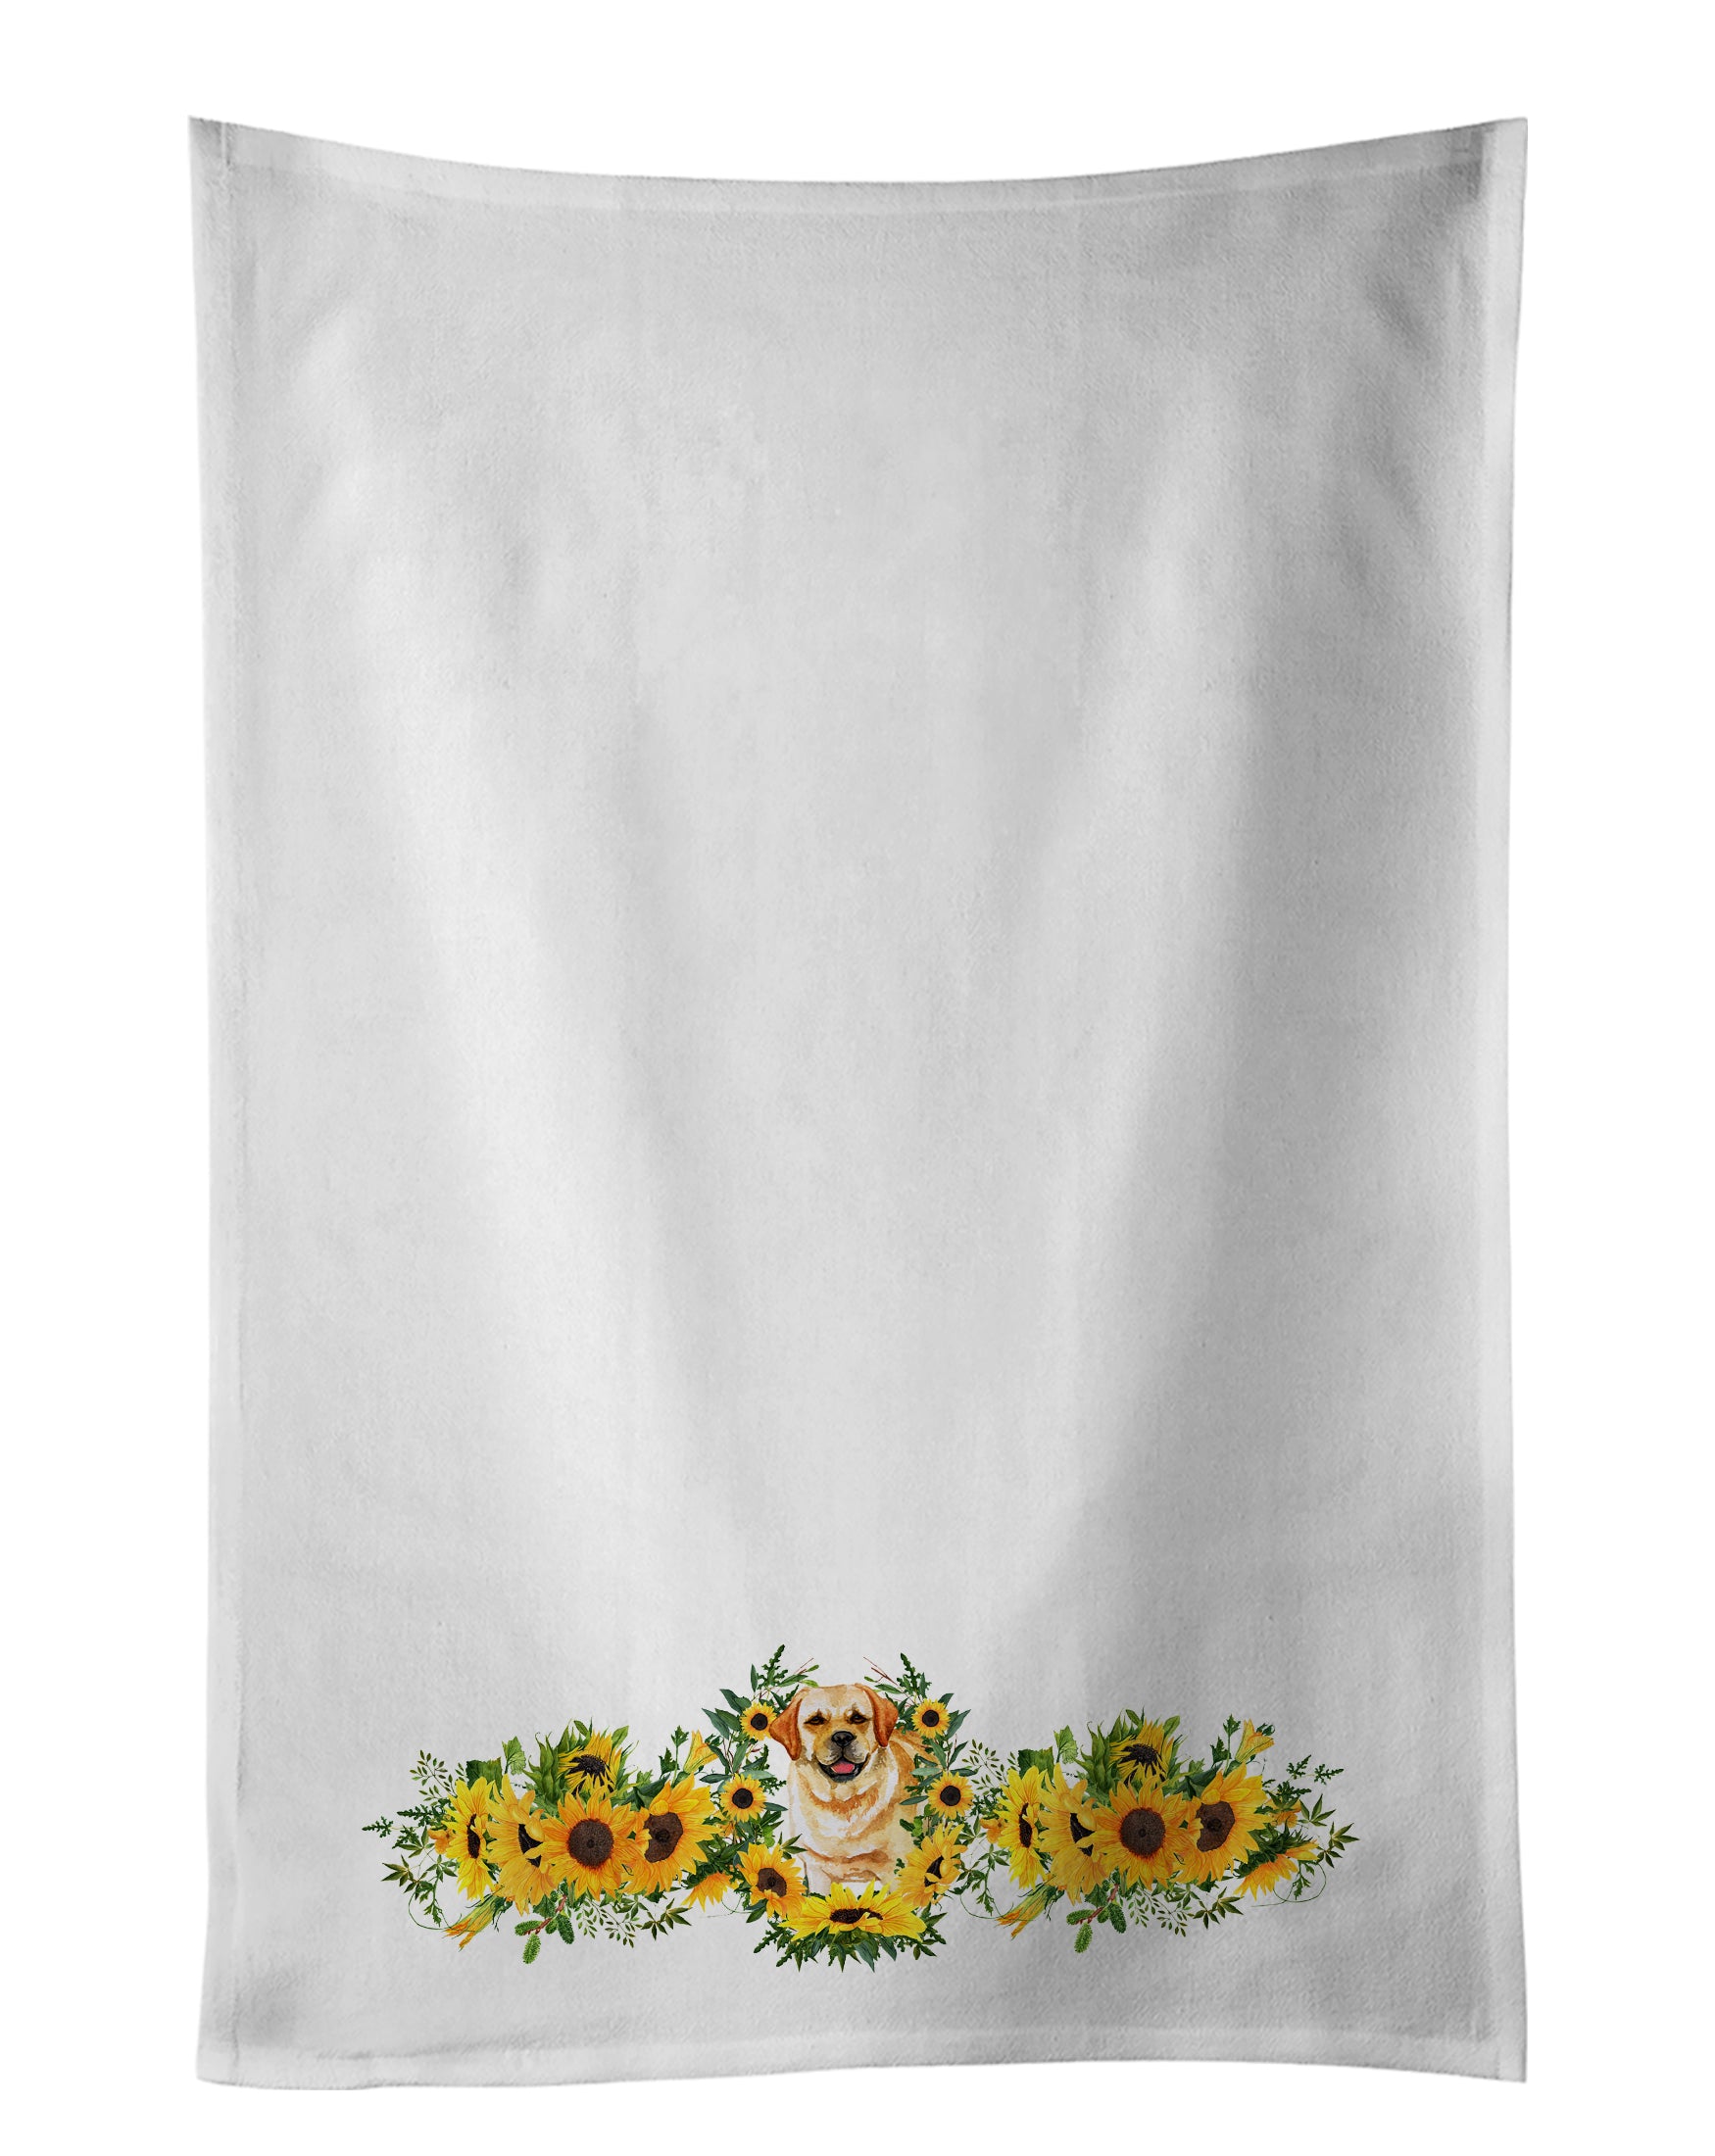 Buy this Golden Retriever in Sunflowers White Kitchen Towel Set of 2